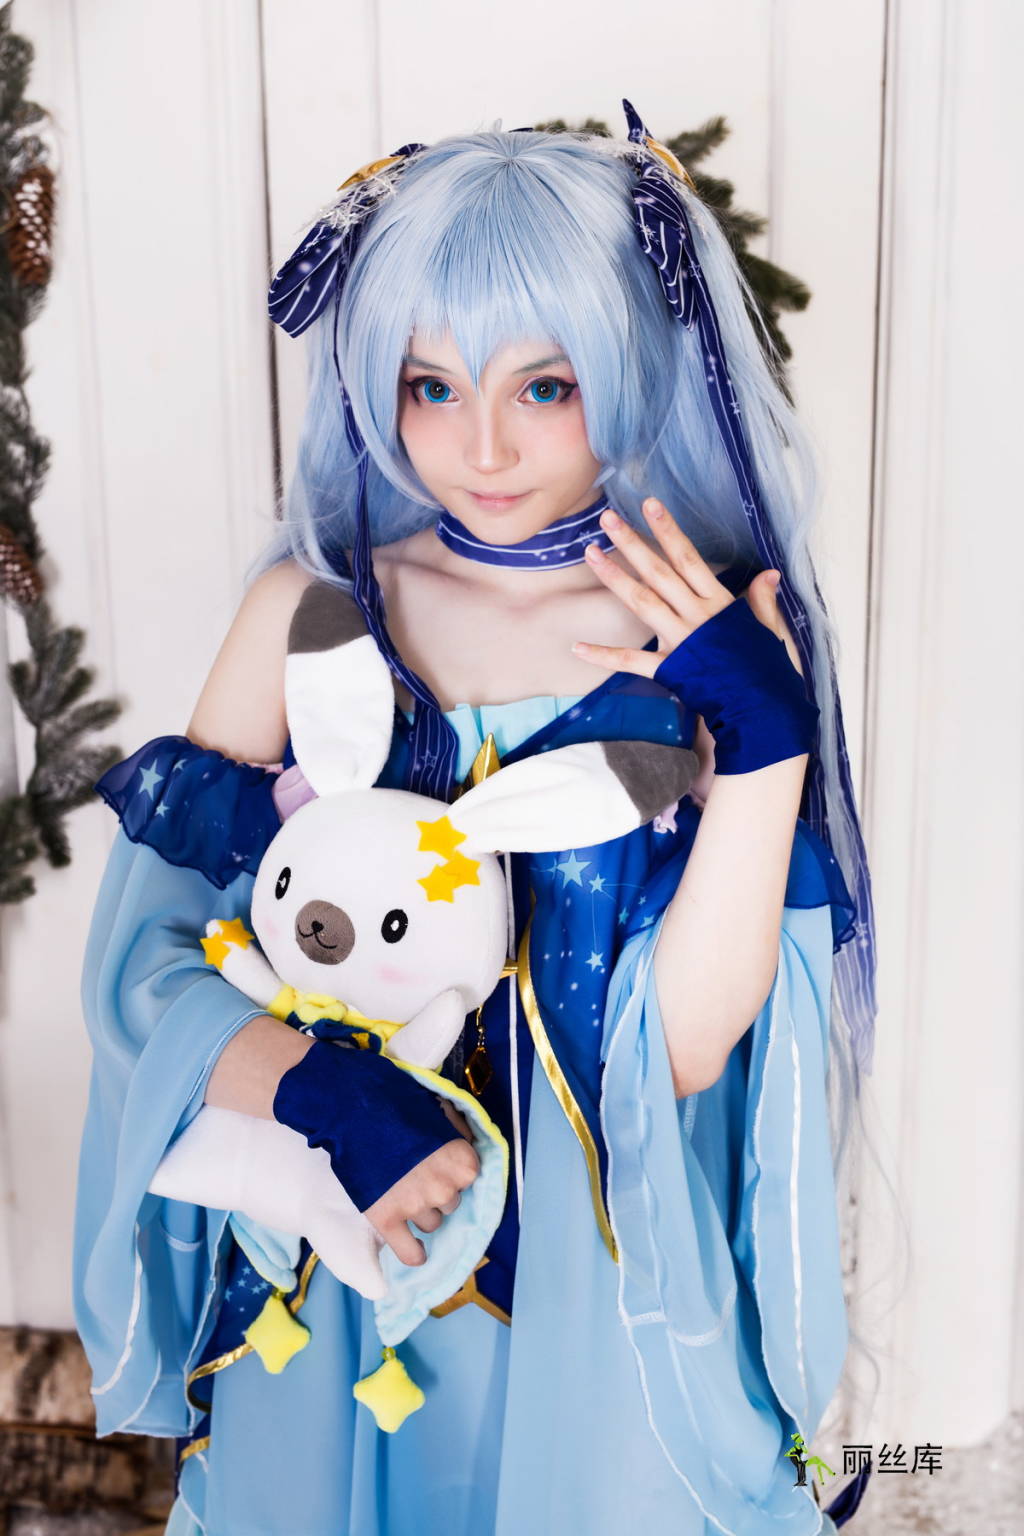 ˹coser RocksyLight Unknown (Vocaloid maybe)_˿